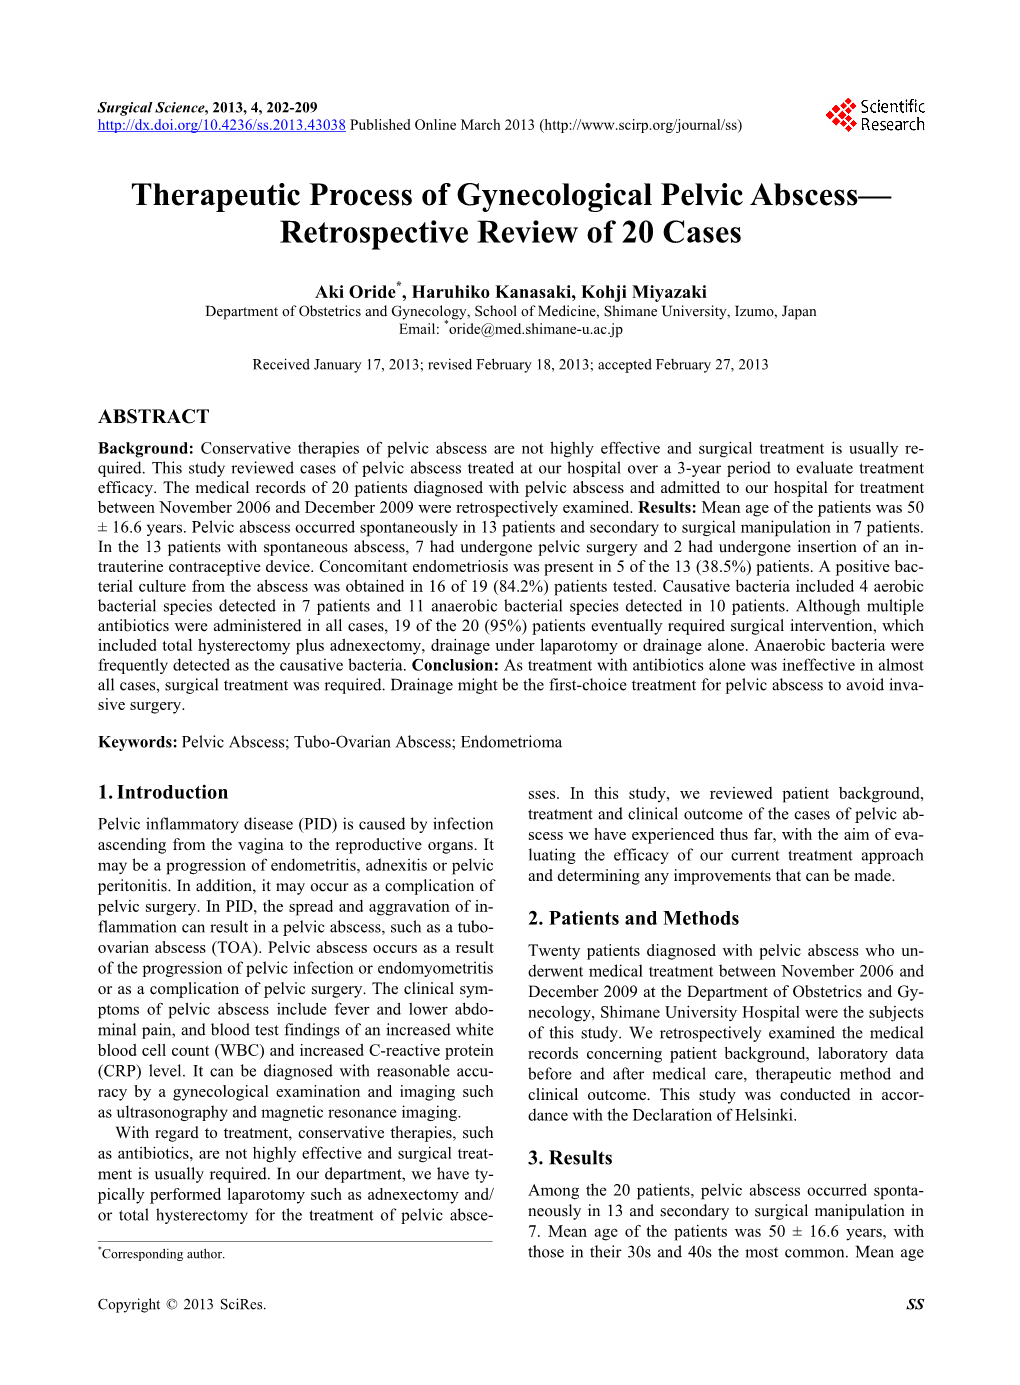 Therapeutic Process of Gynecological Pelvic Abscess— Retrospective Review of 20 Cases